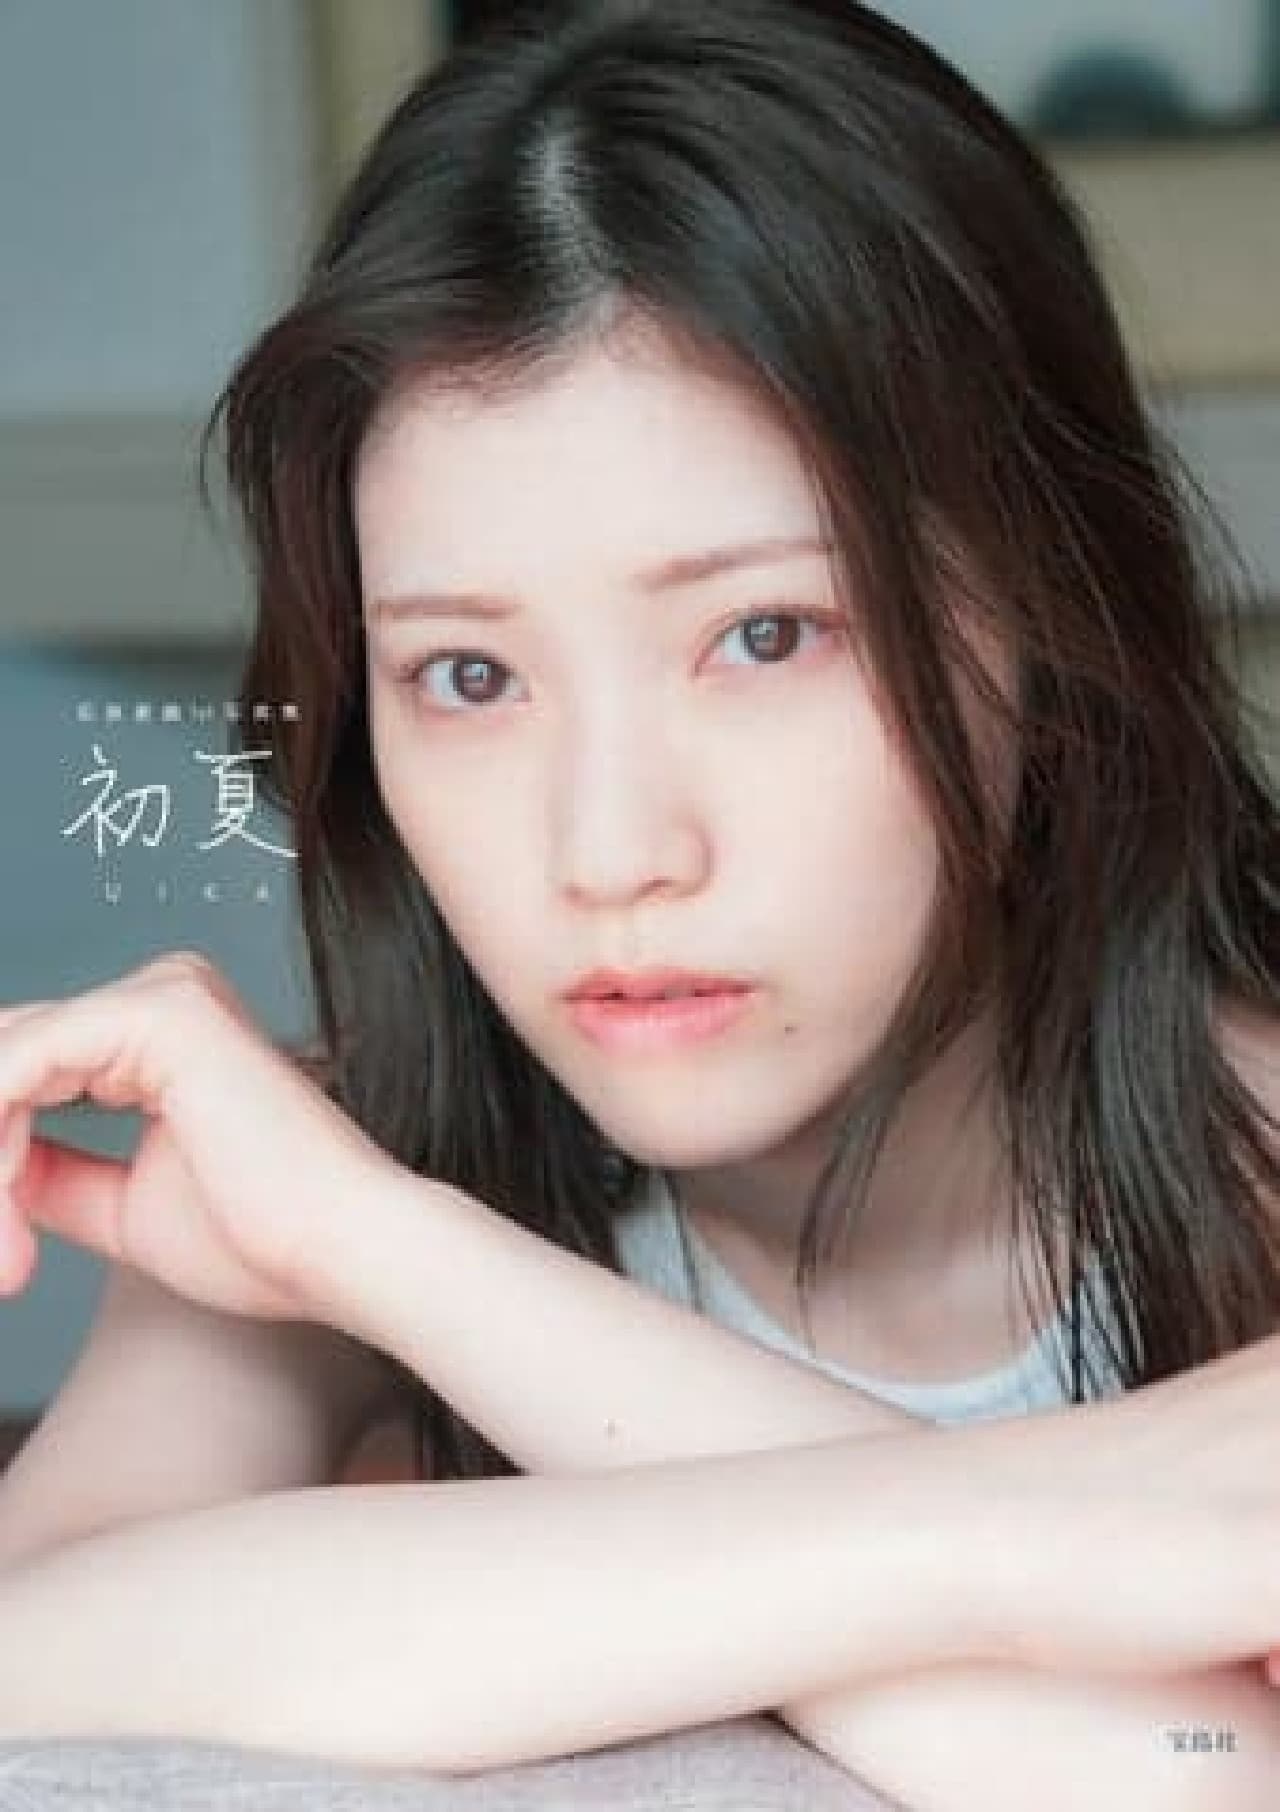 Natsuori Ishihara's first photo book "Hatsu Natsu UIKA Natsuori Ishihara 1st Photo Book" will be released by Takarajimasya on August 6! Events to commemorate the release will be held in Tokyo and Osaka.